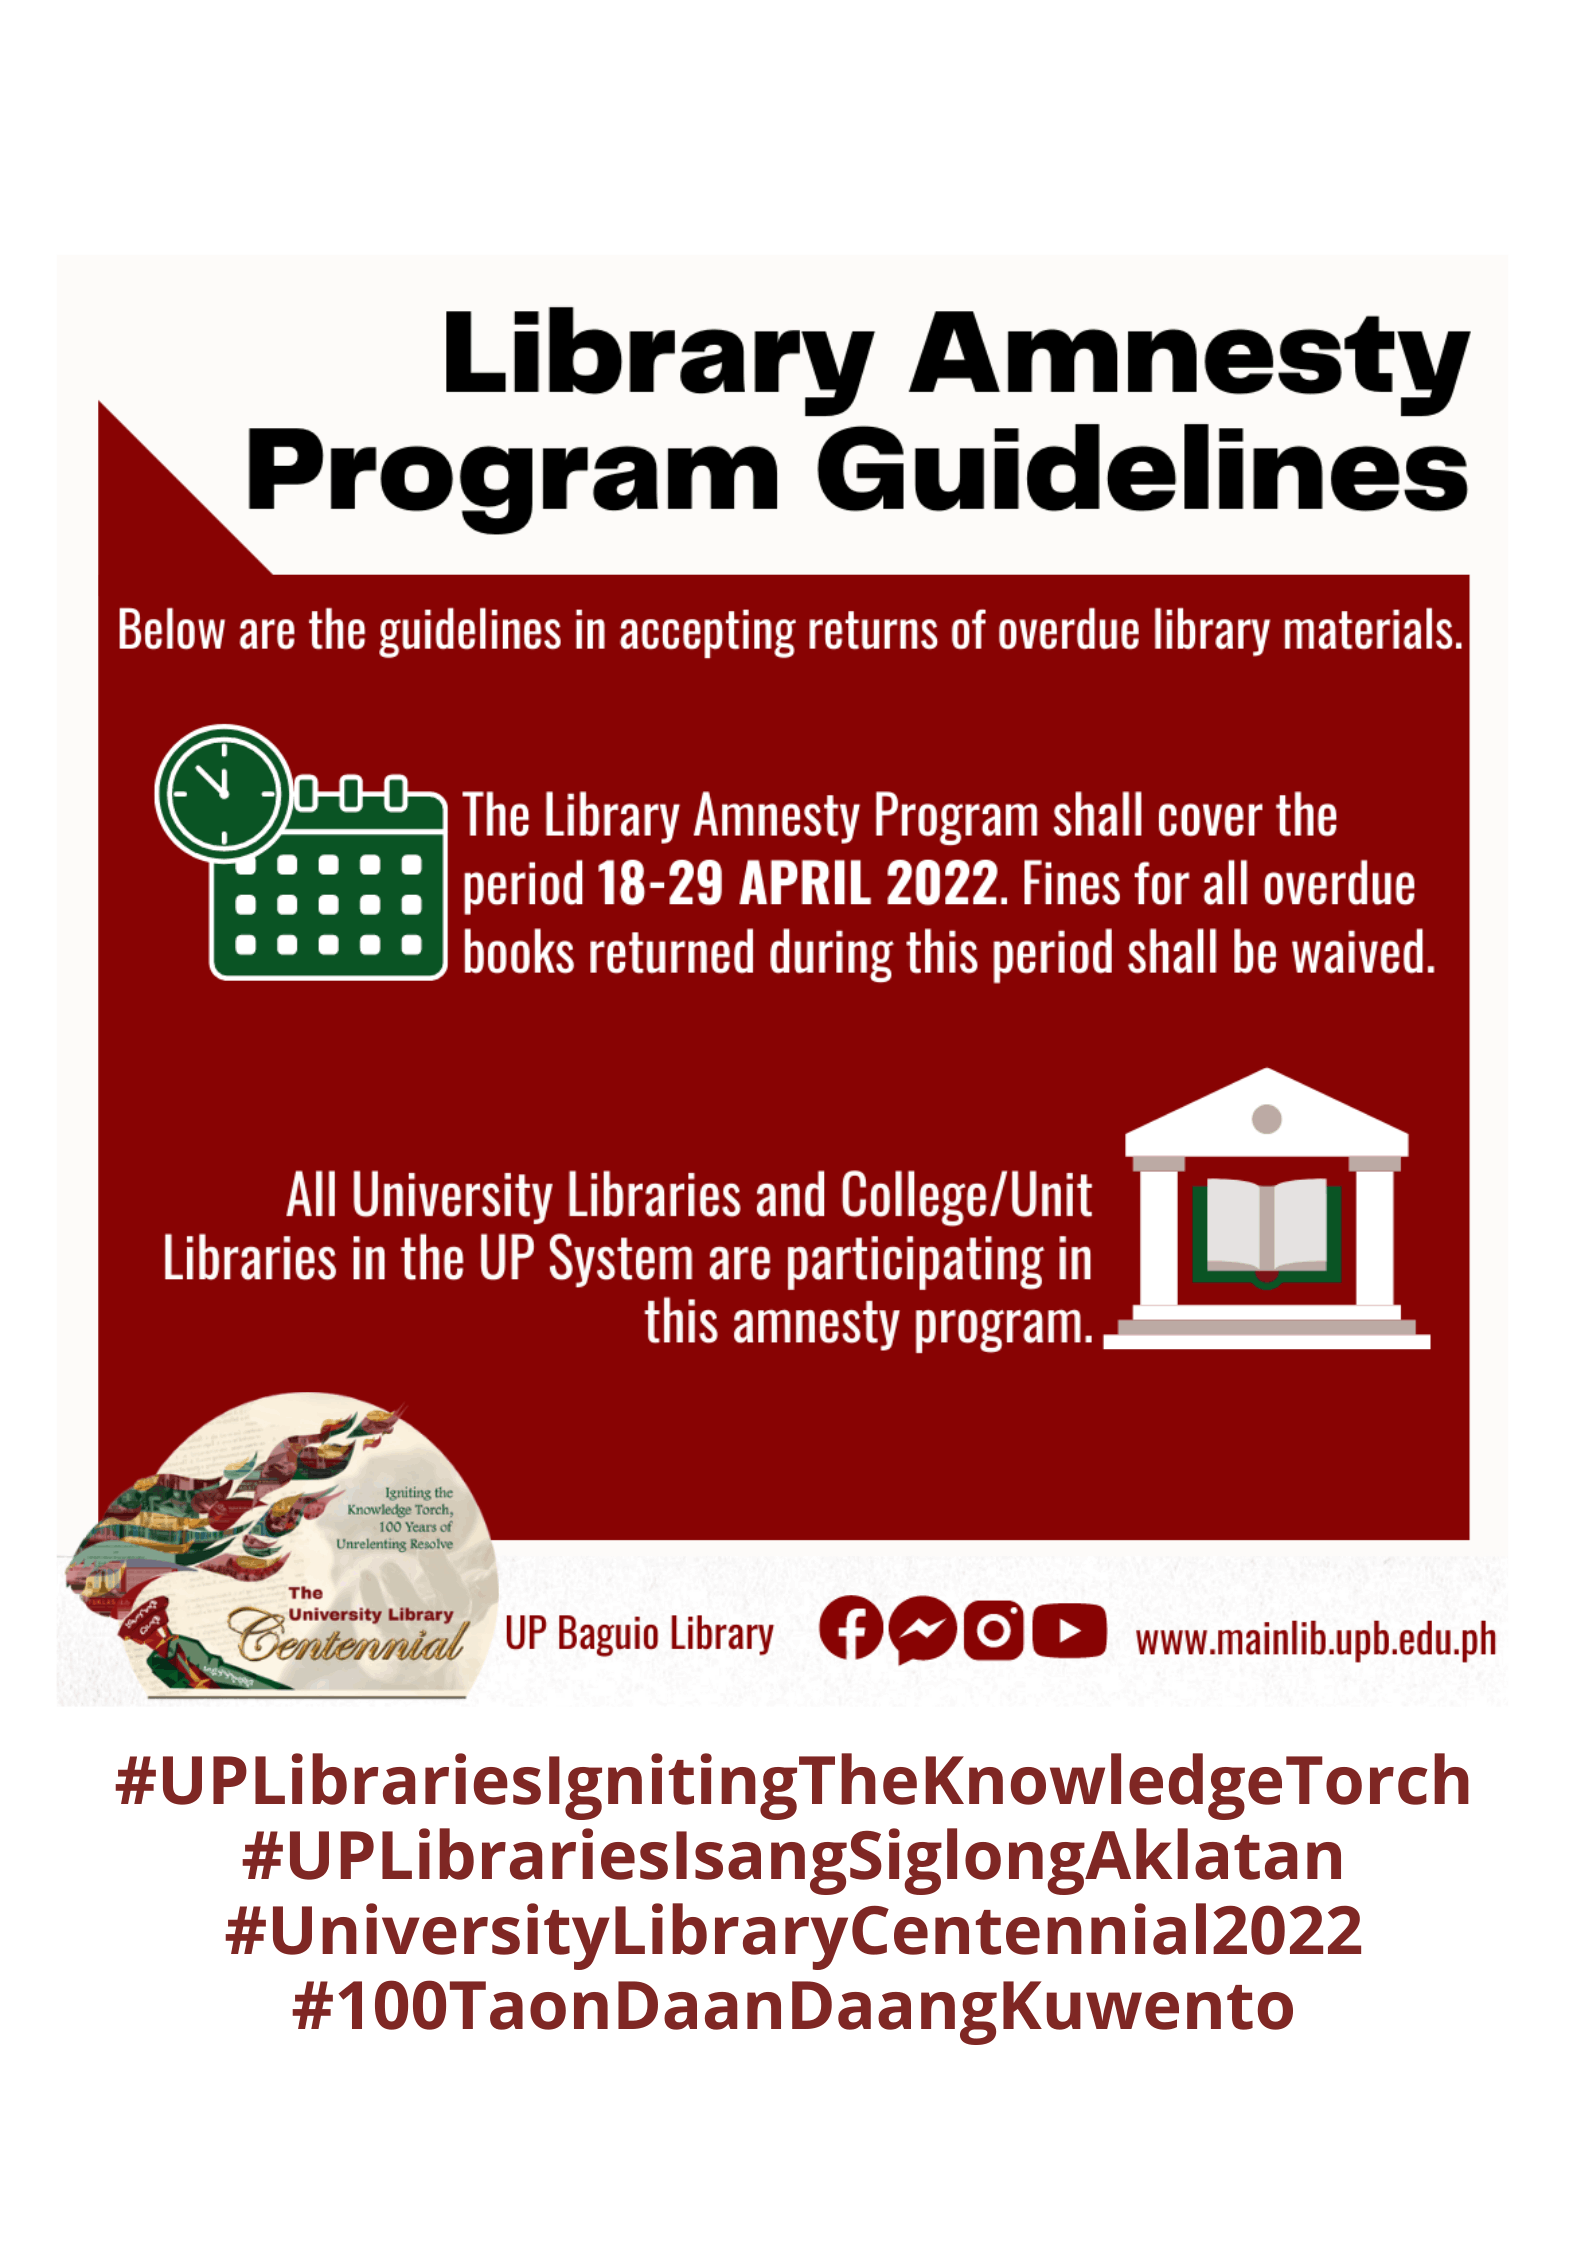 Library Amnesty Program The University Library, UP Baguio